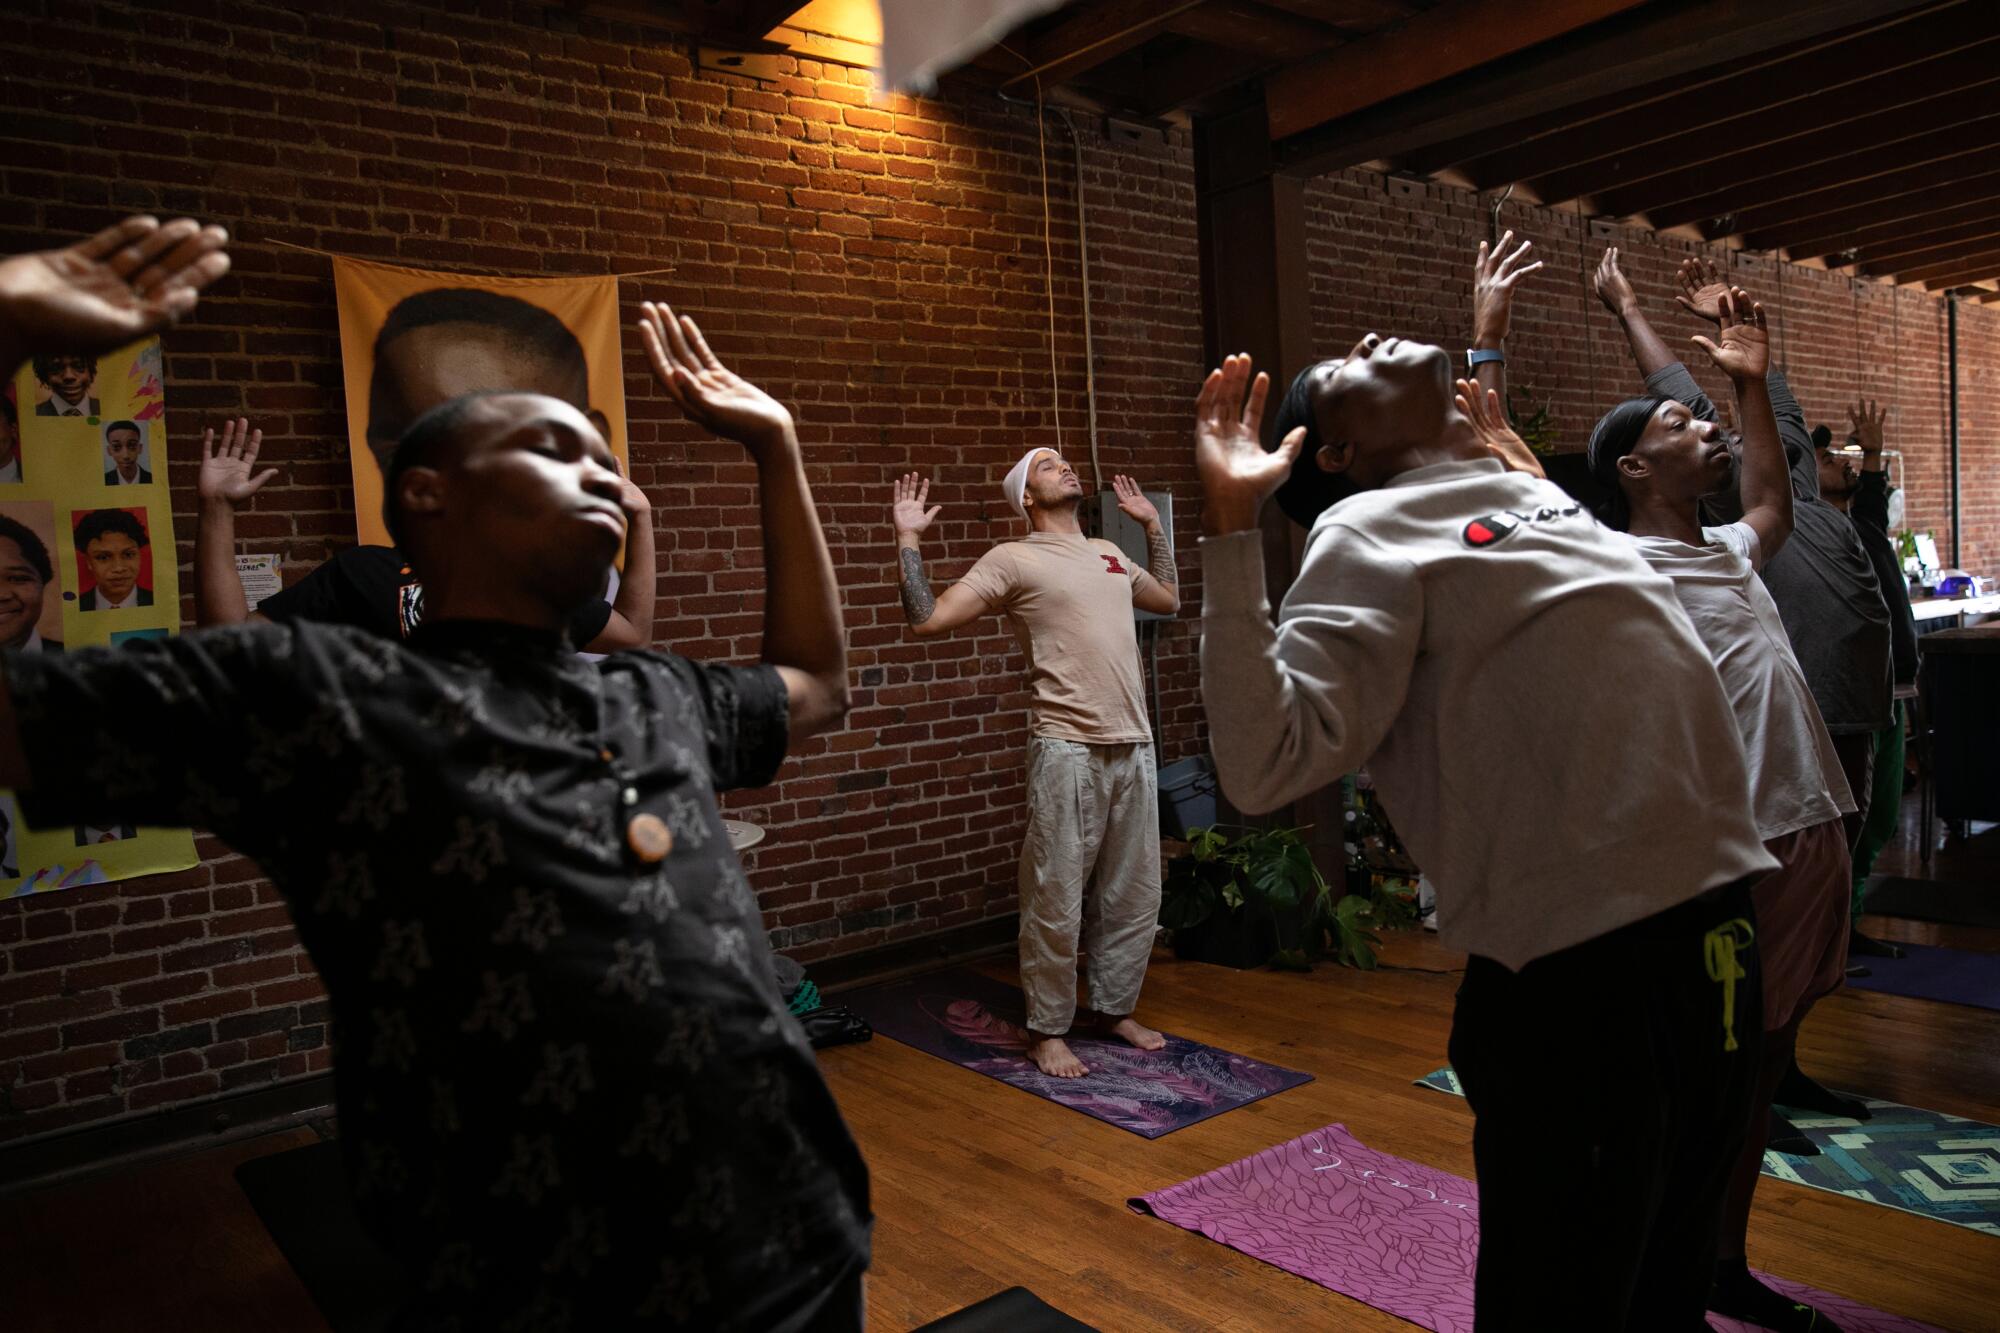 Bobby Brown, back row, stands with his arms open wide as he meditates with other Black men in a healing circle.